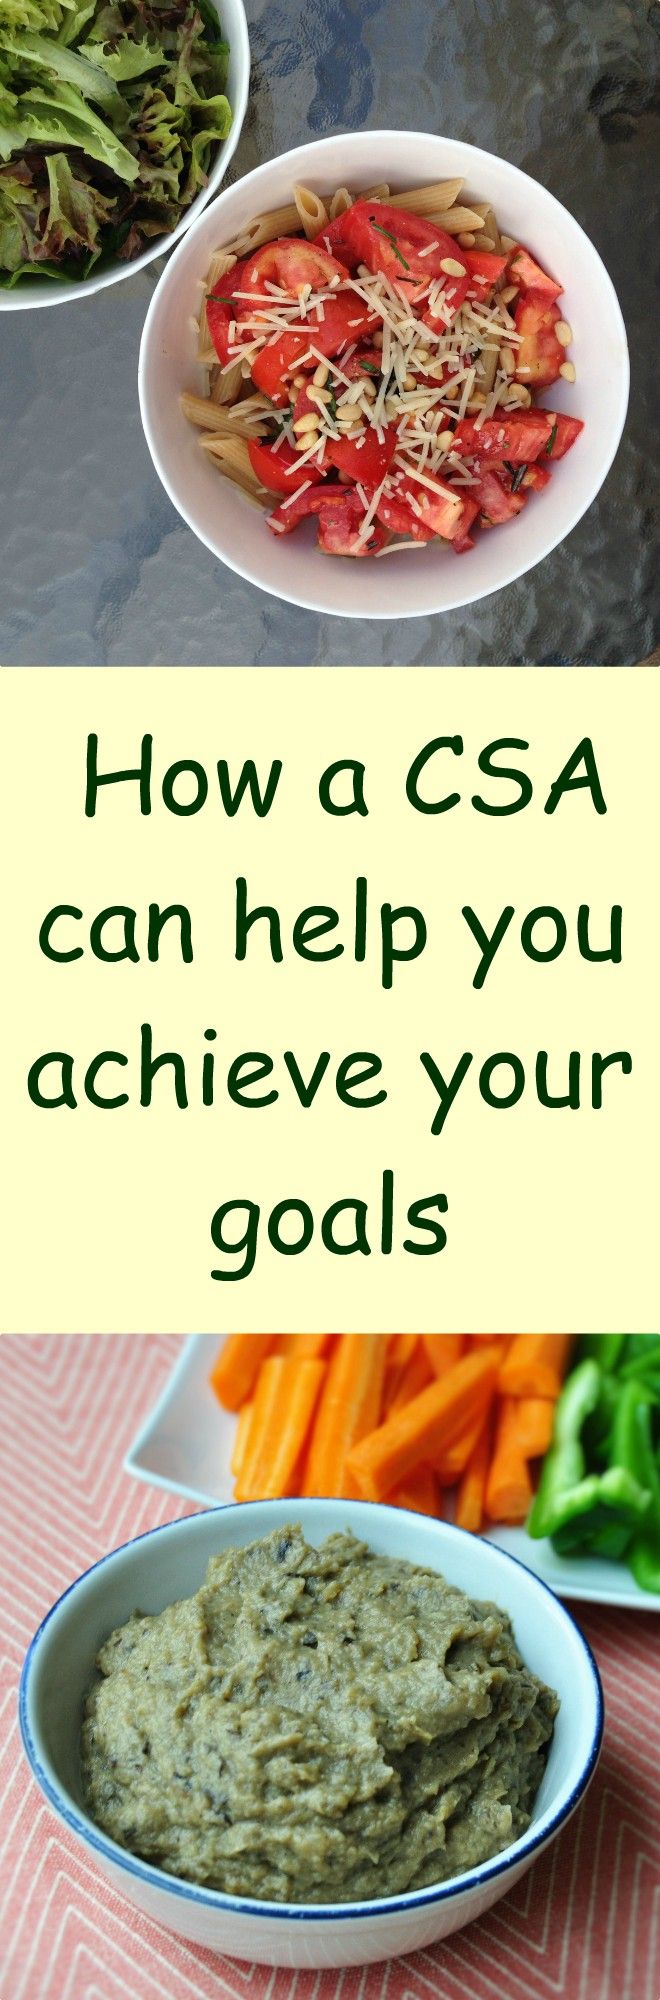 How a CSA can help you achieve your goals